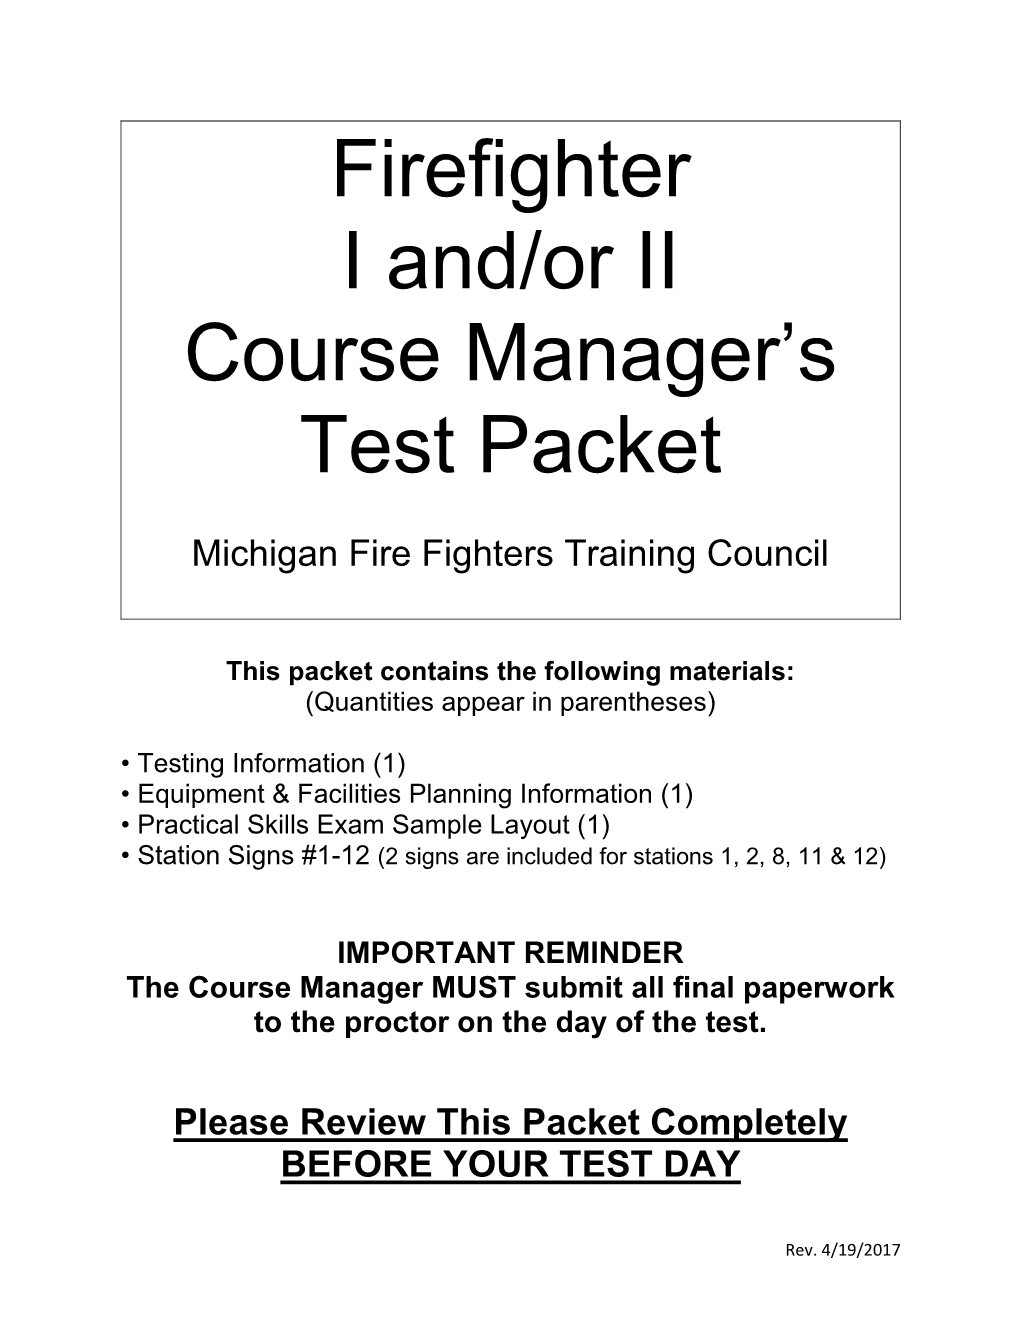 Firefighter I And/Or II Course Manager's Test Packet